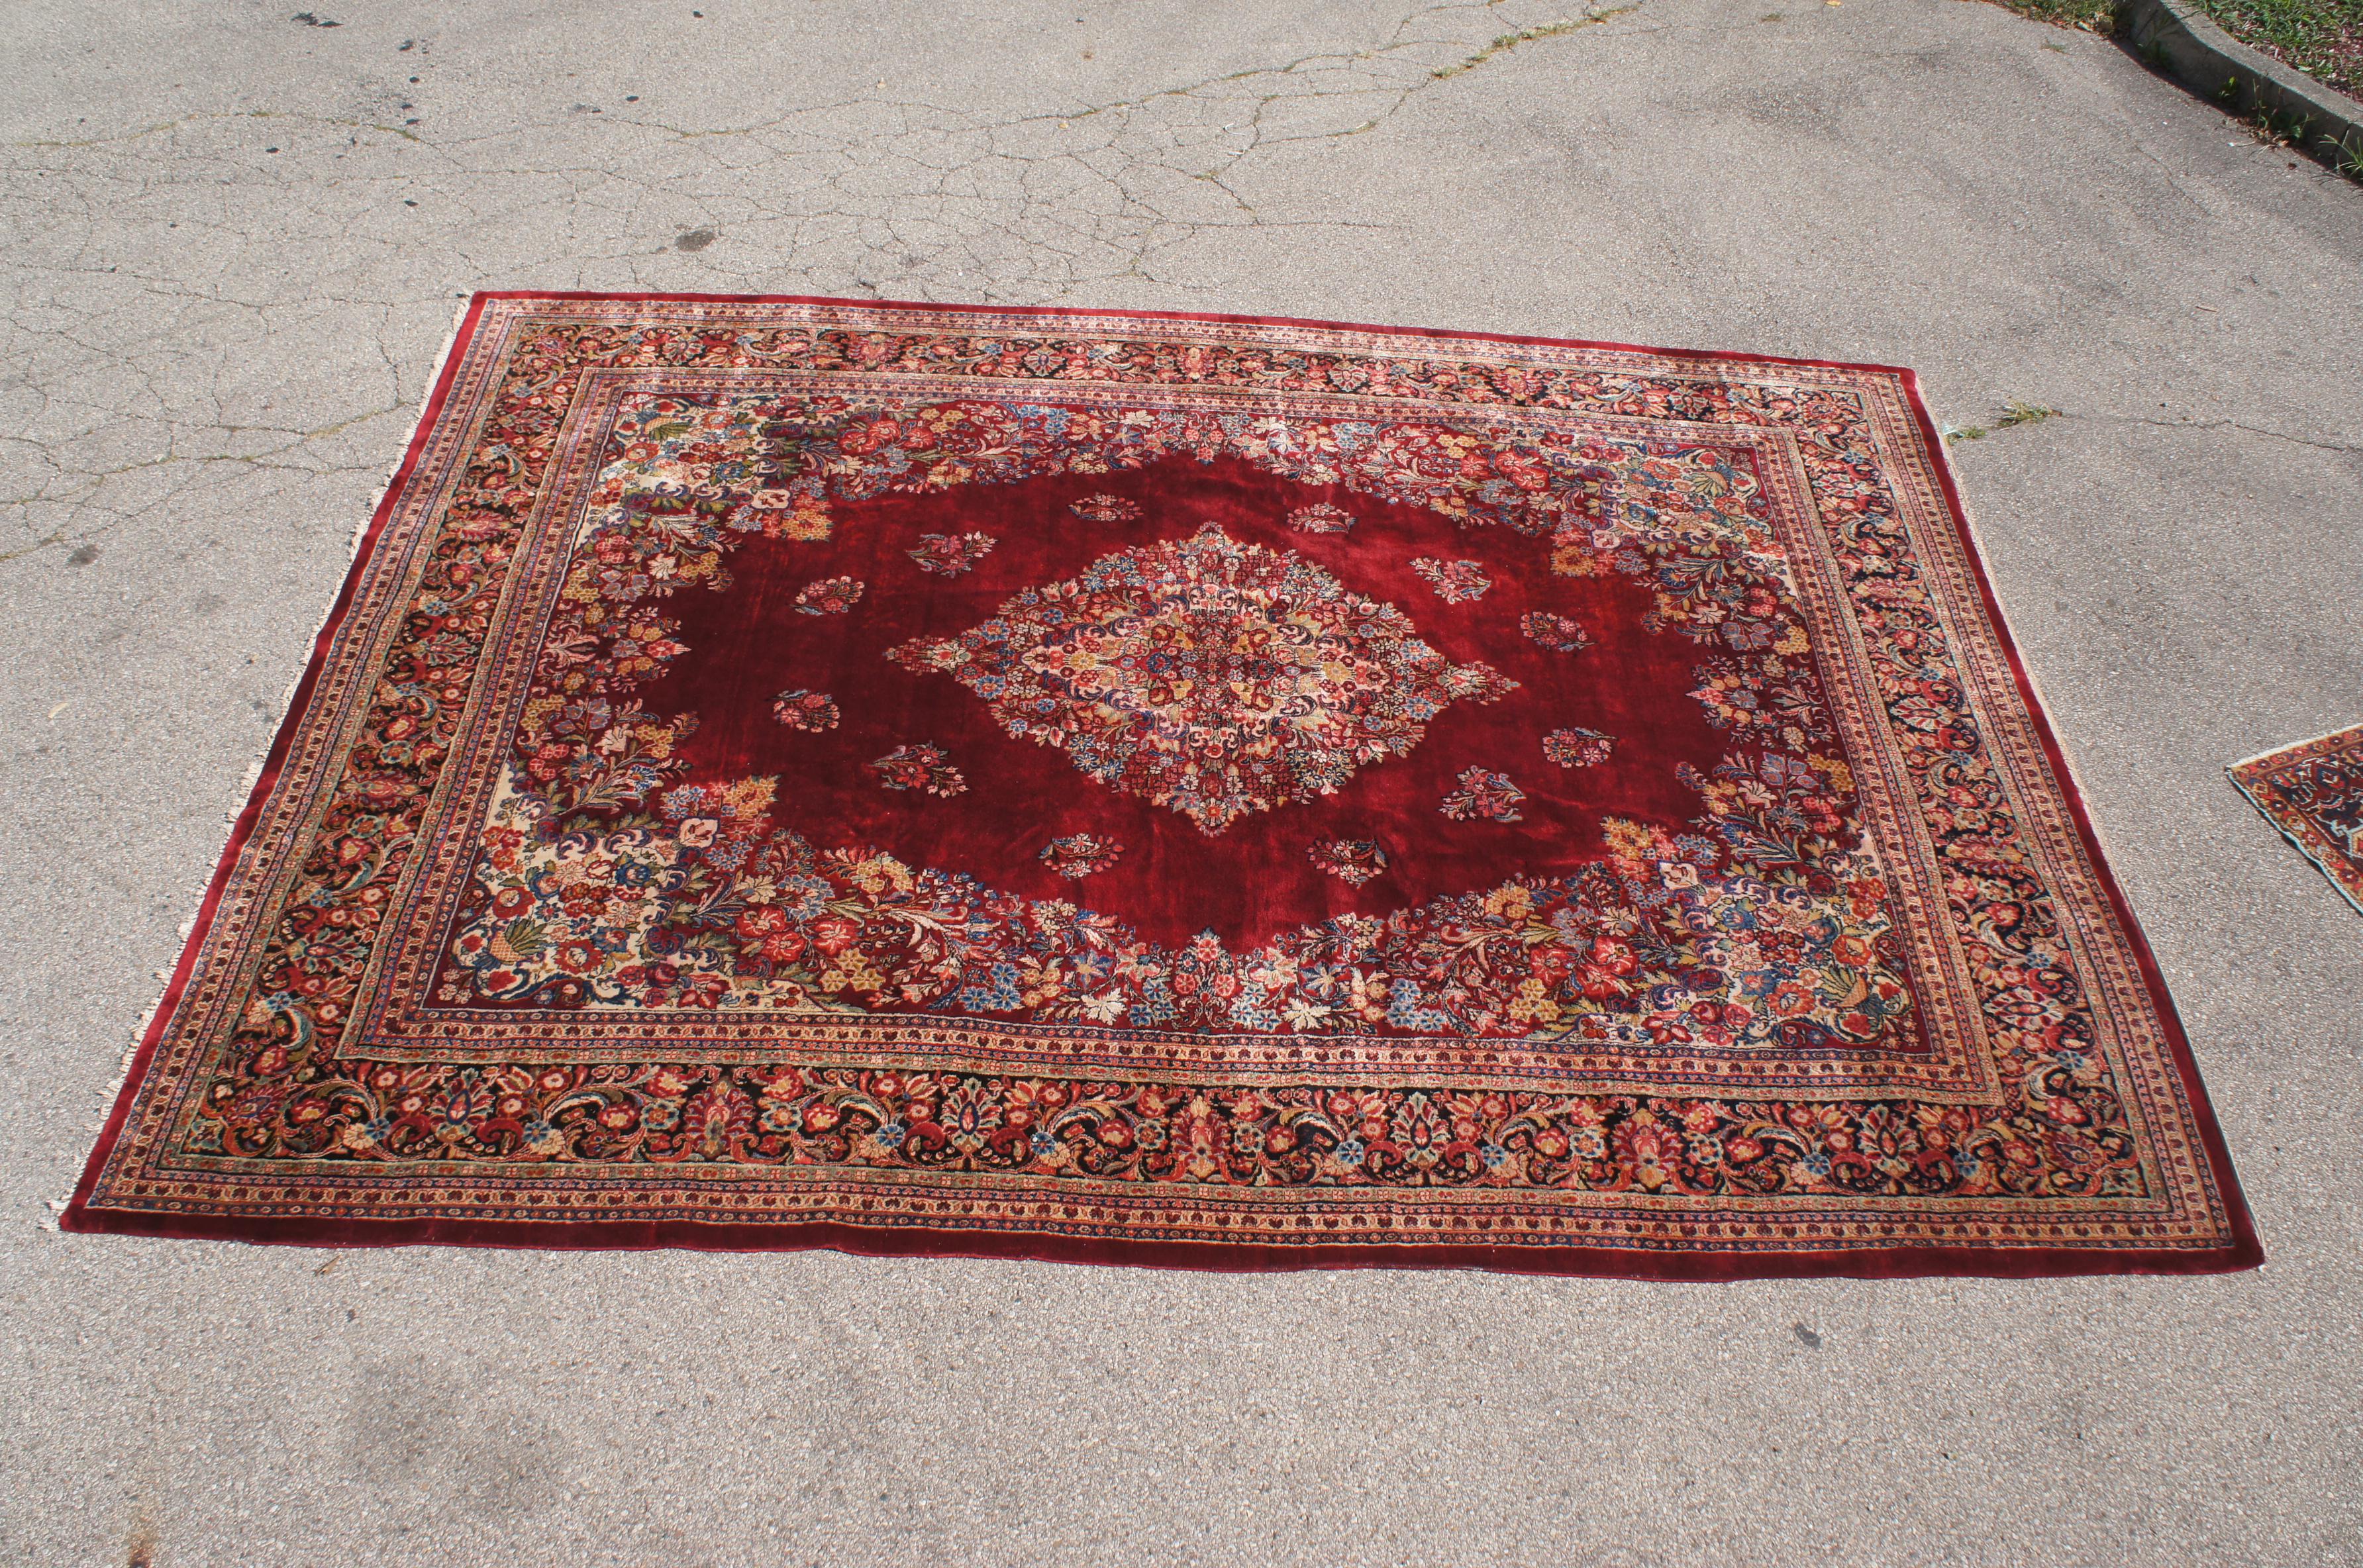 20th Century Vintage Indo-Tabriz Hand Knotted Floral Medallion Wool Area Rug Carpet 10' x 14' For Sale